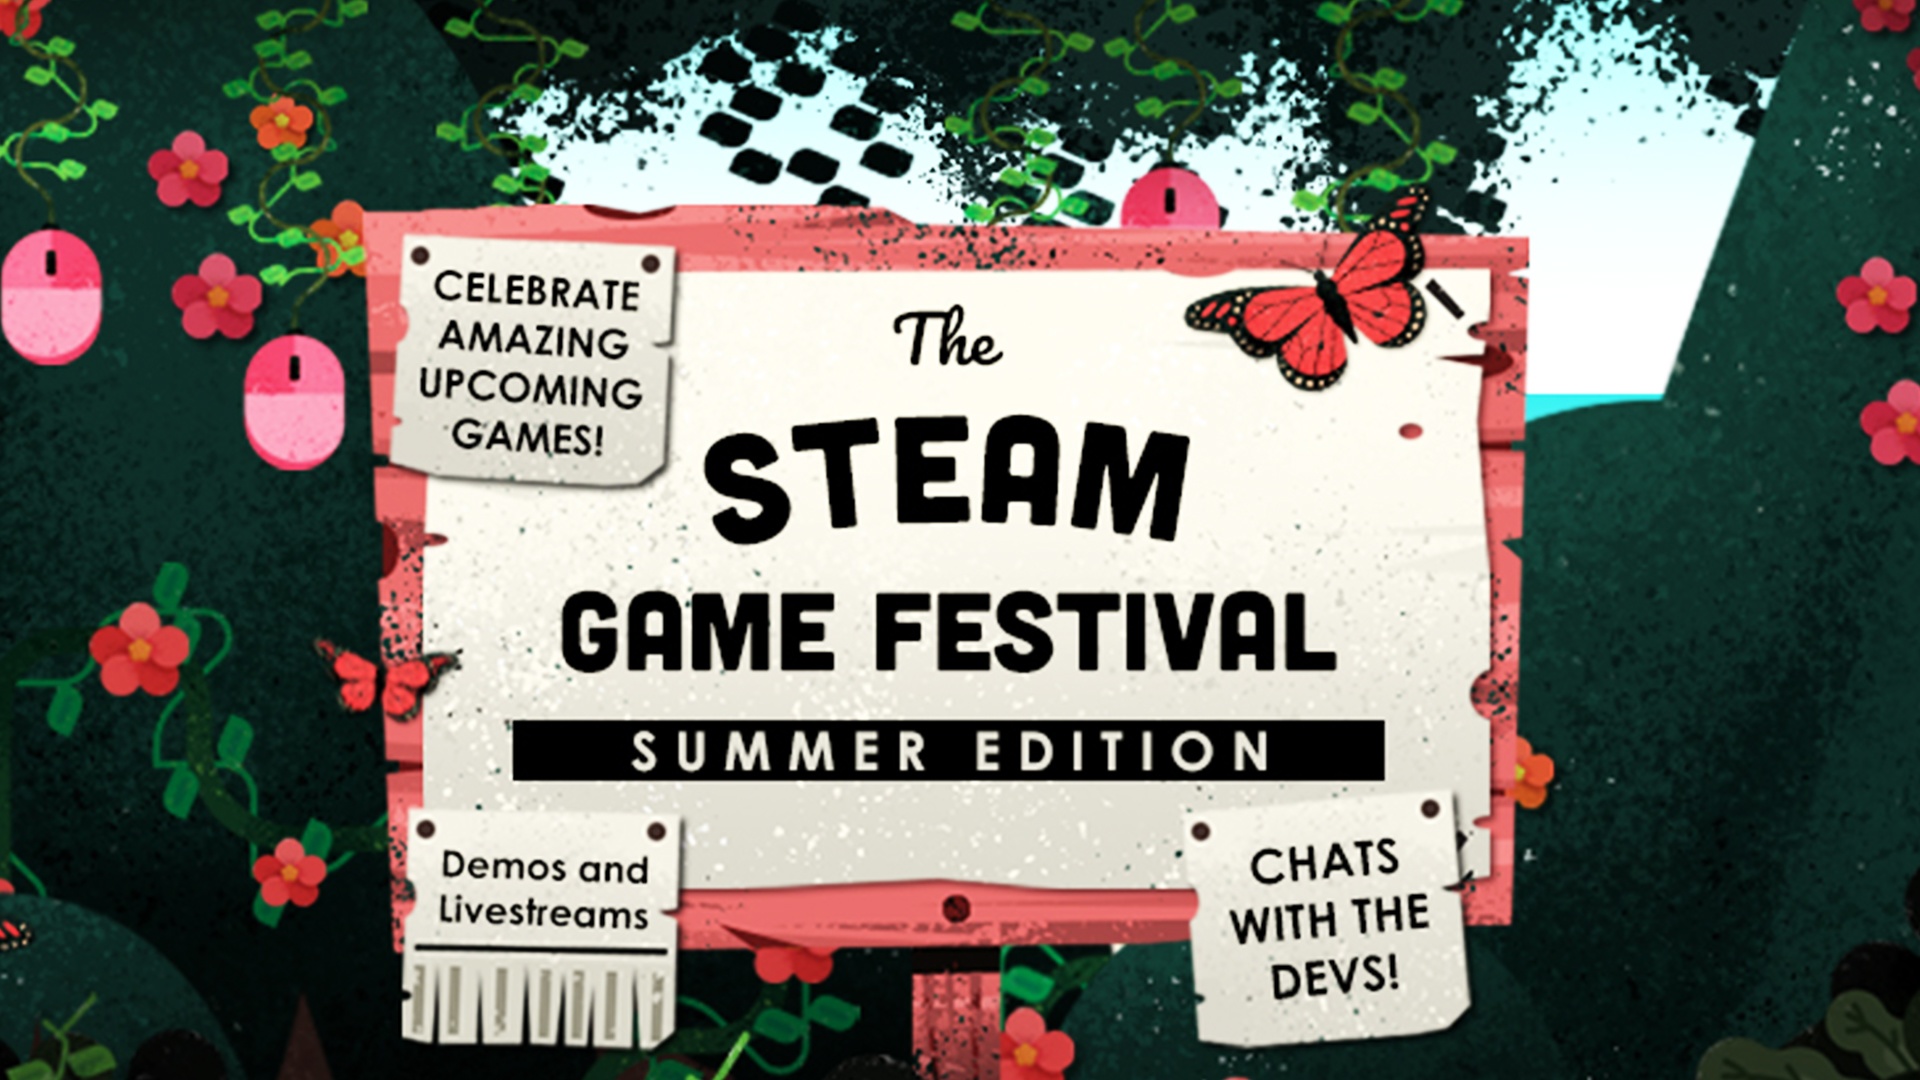 Steam Summer Festival The Date For Next Demo Event Has Been Set